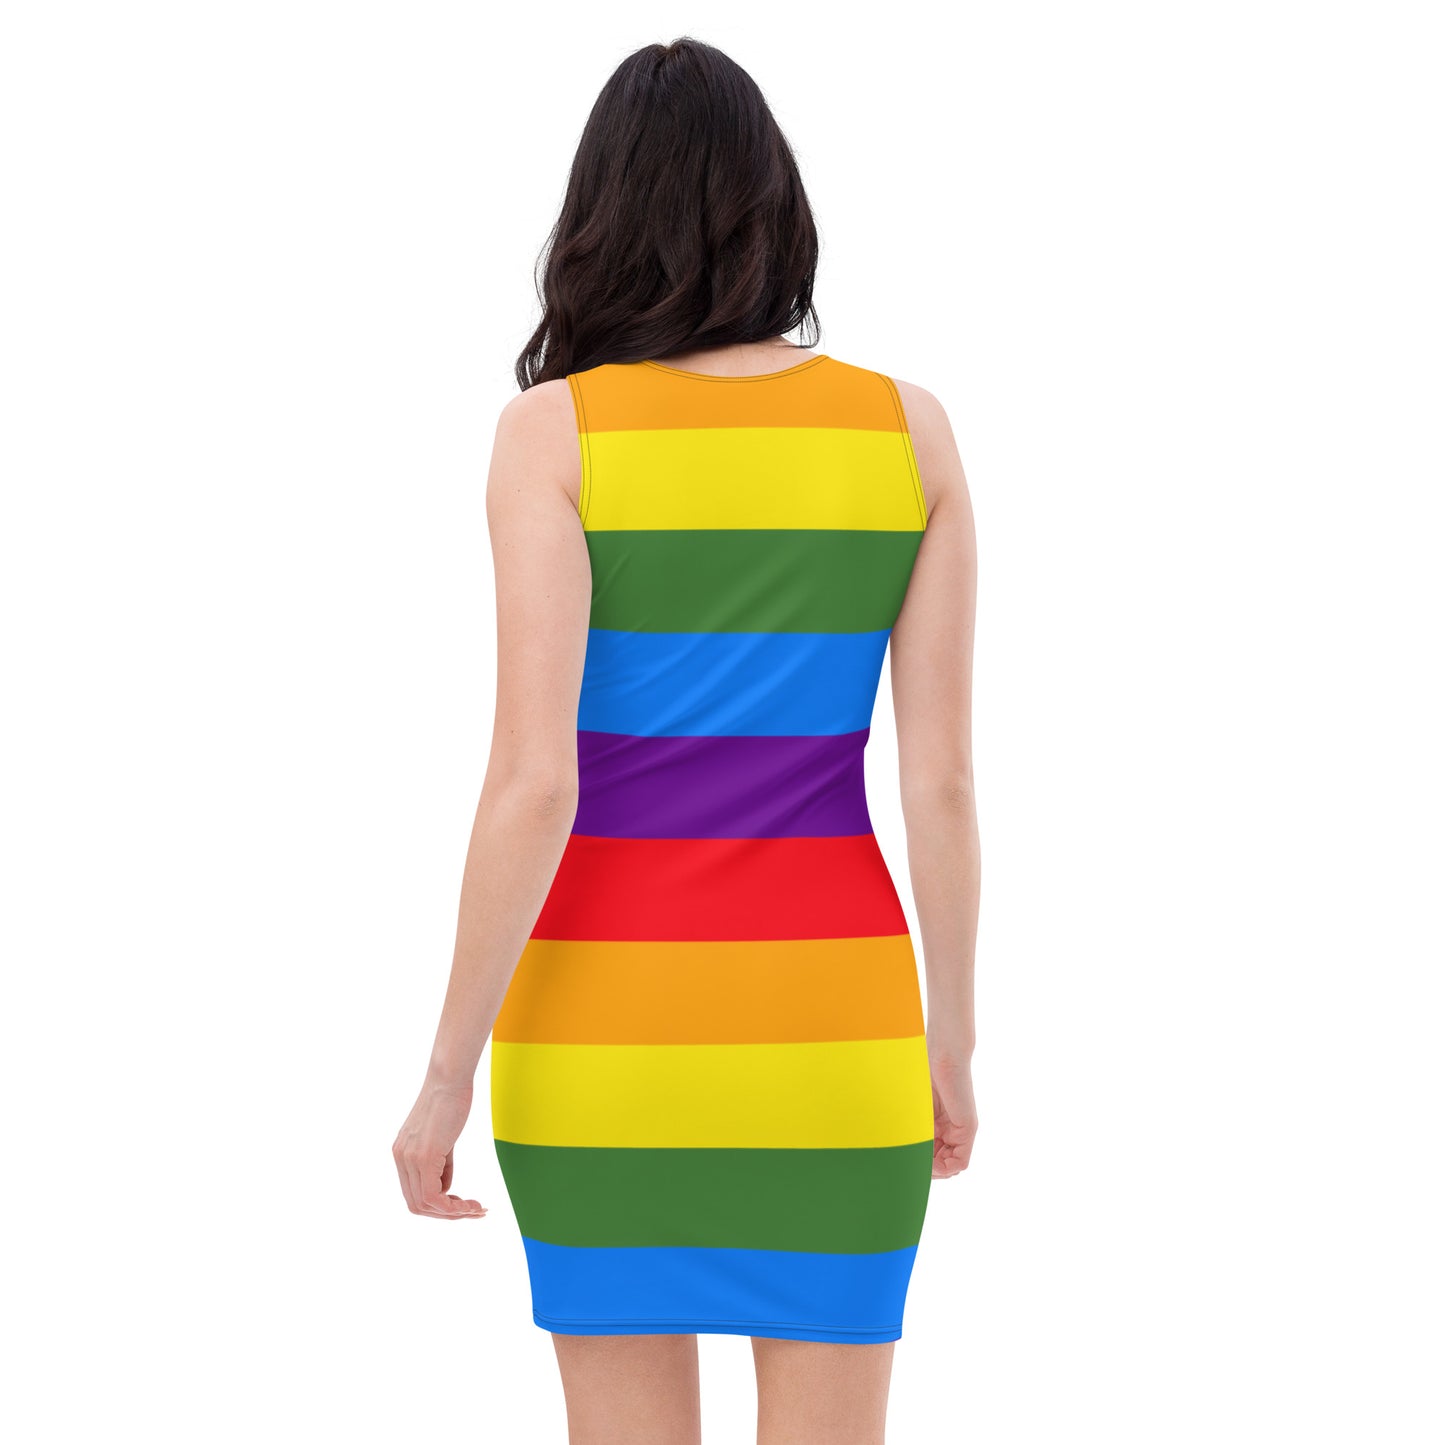 Rainbow Fitted Dress (Lion front)